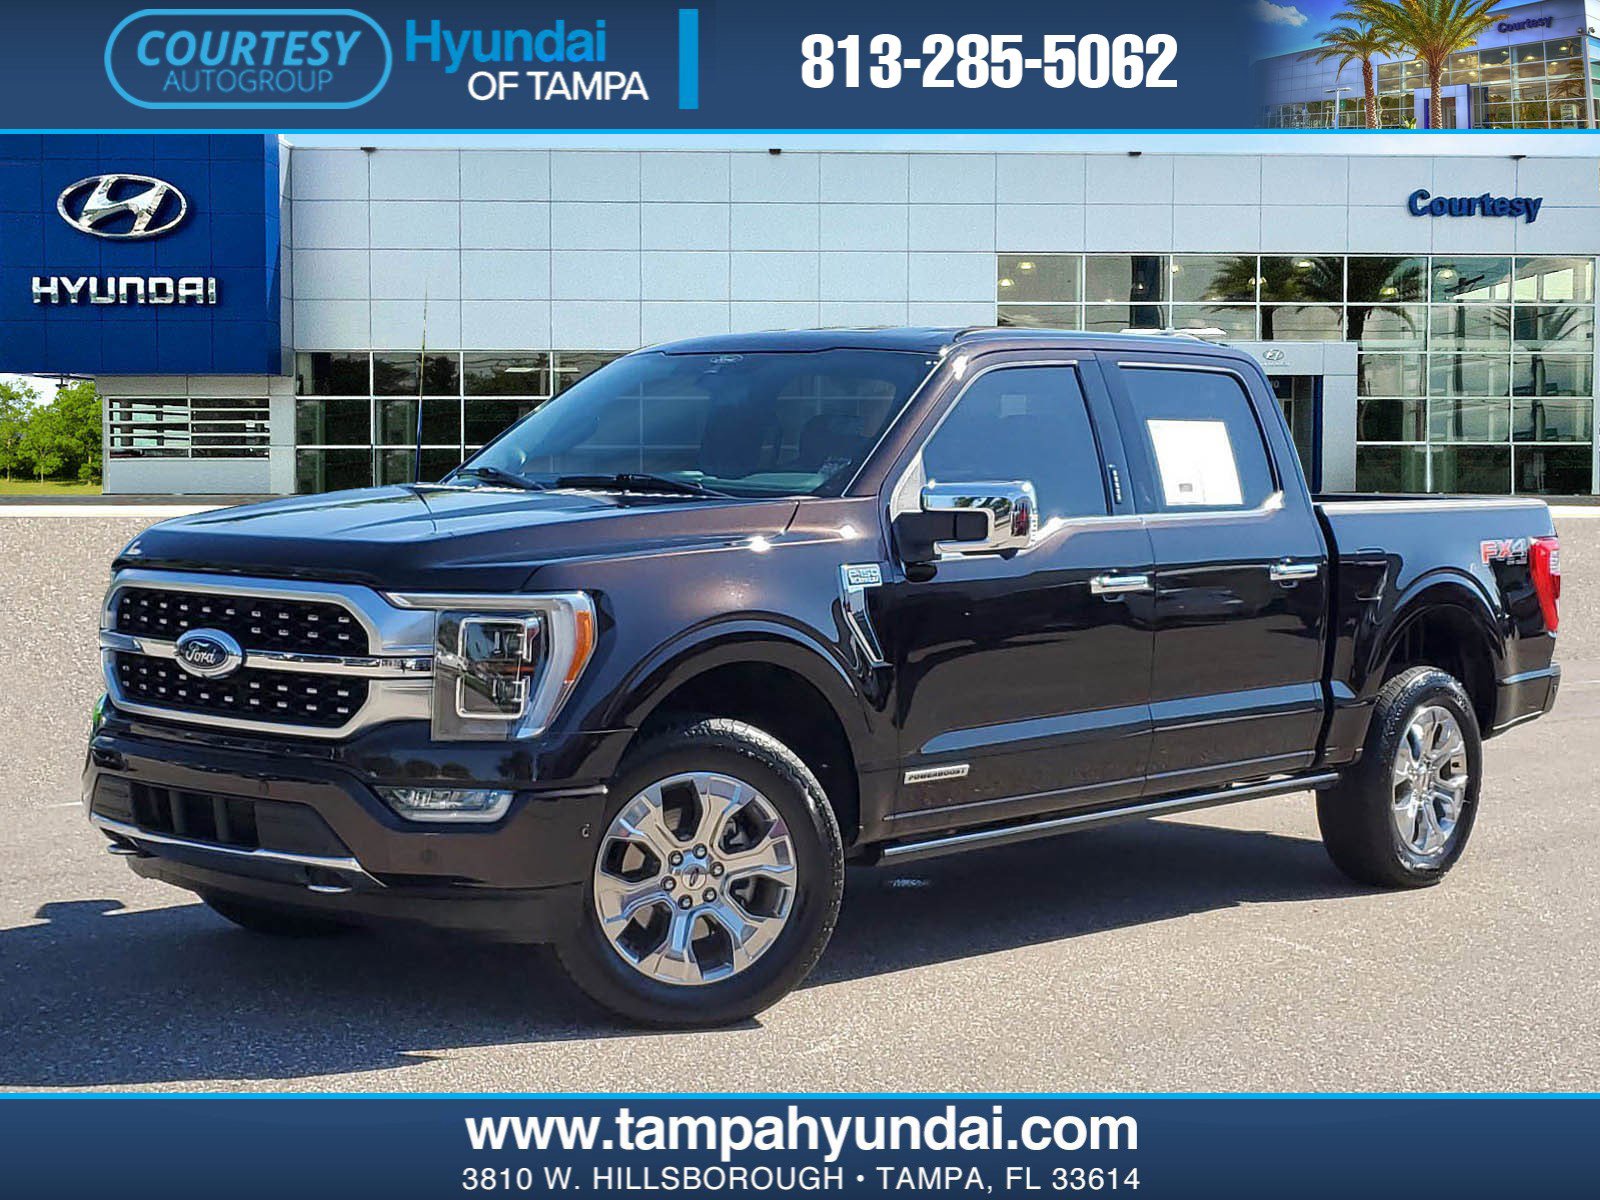 trucks for sale tampa bay